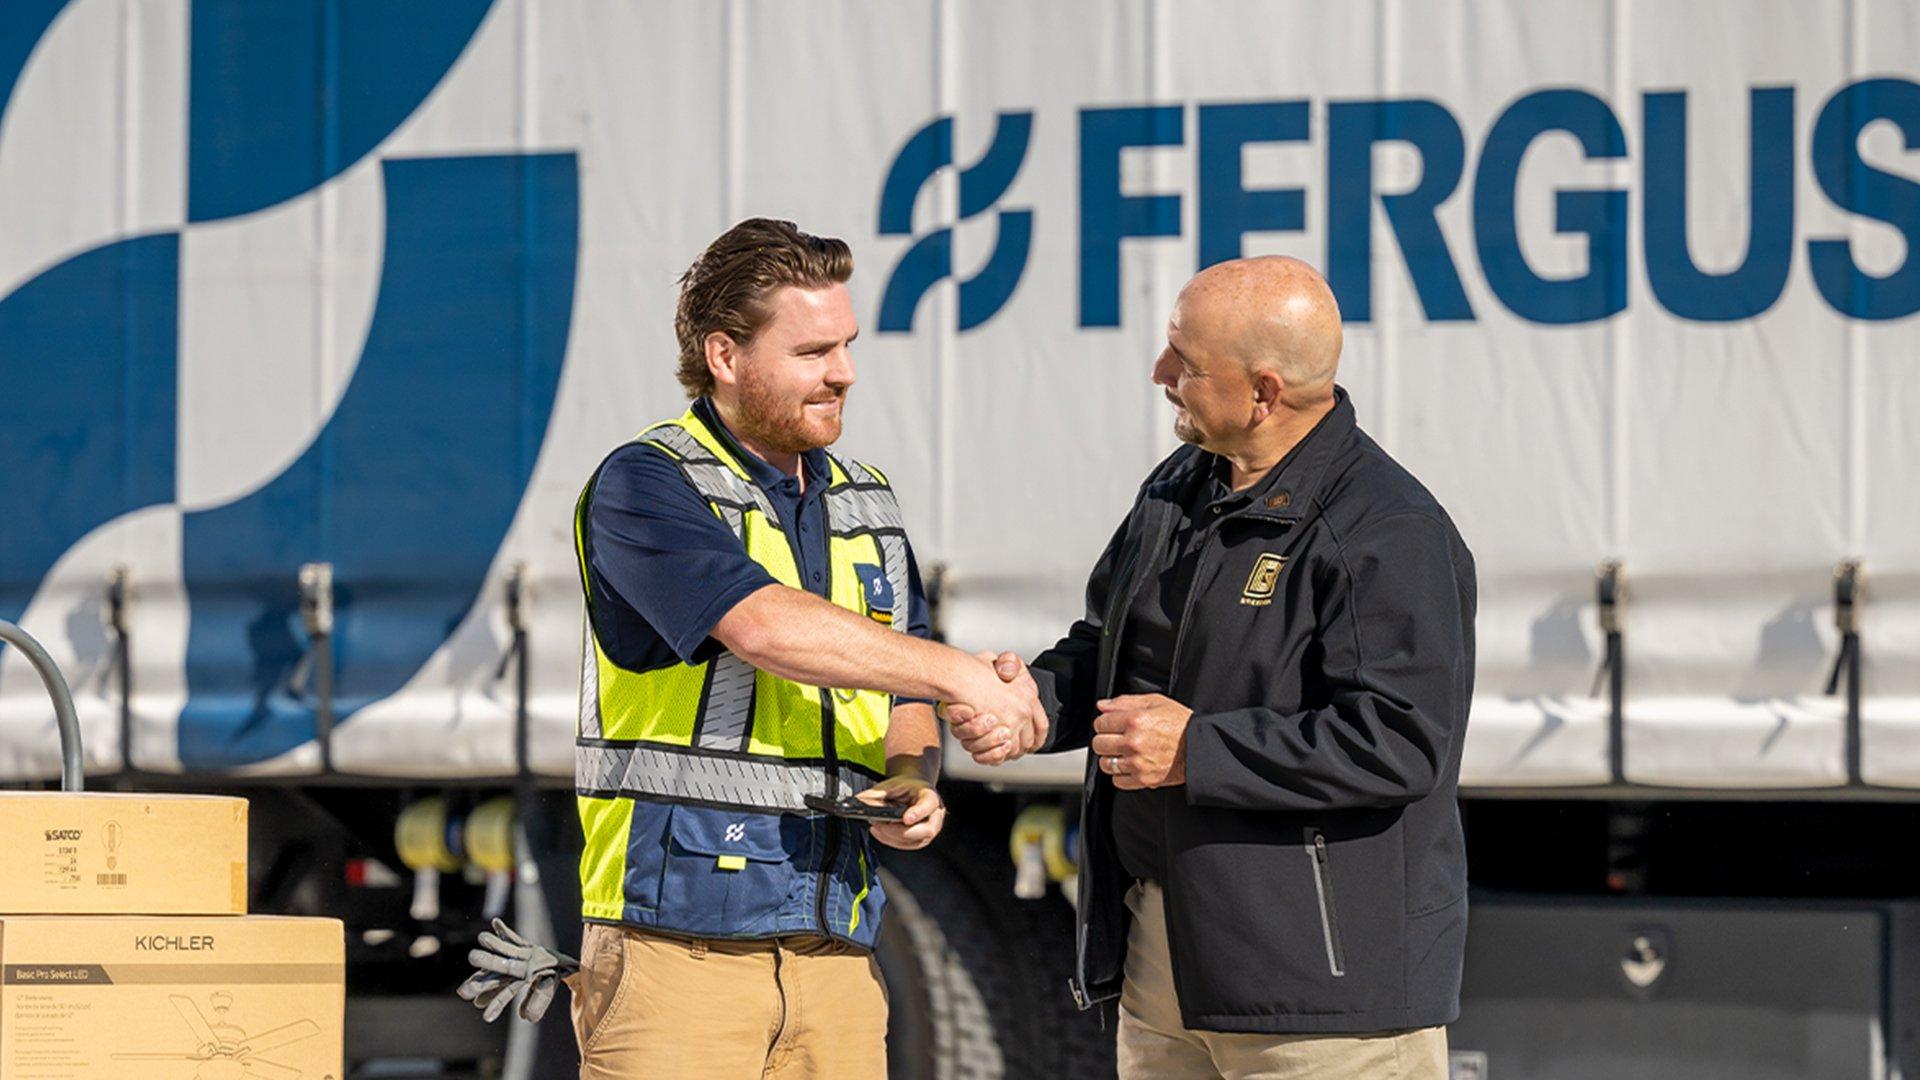 A Ferguson associate shakes hands with a facilities manager next to a stack of boxes on a dolly to their right and a delivery truck parked in the background.